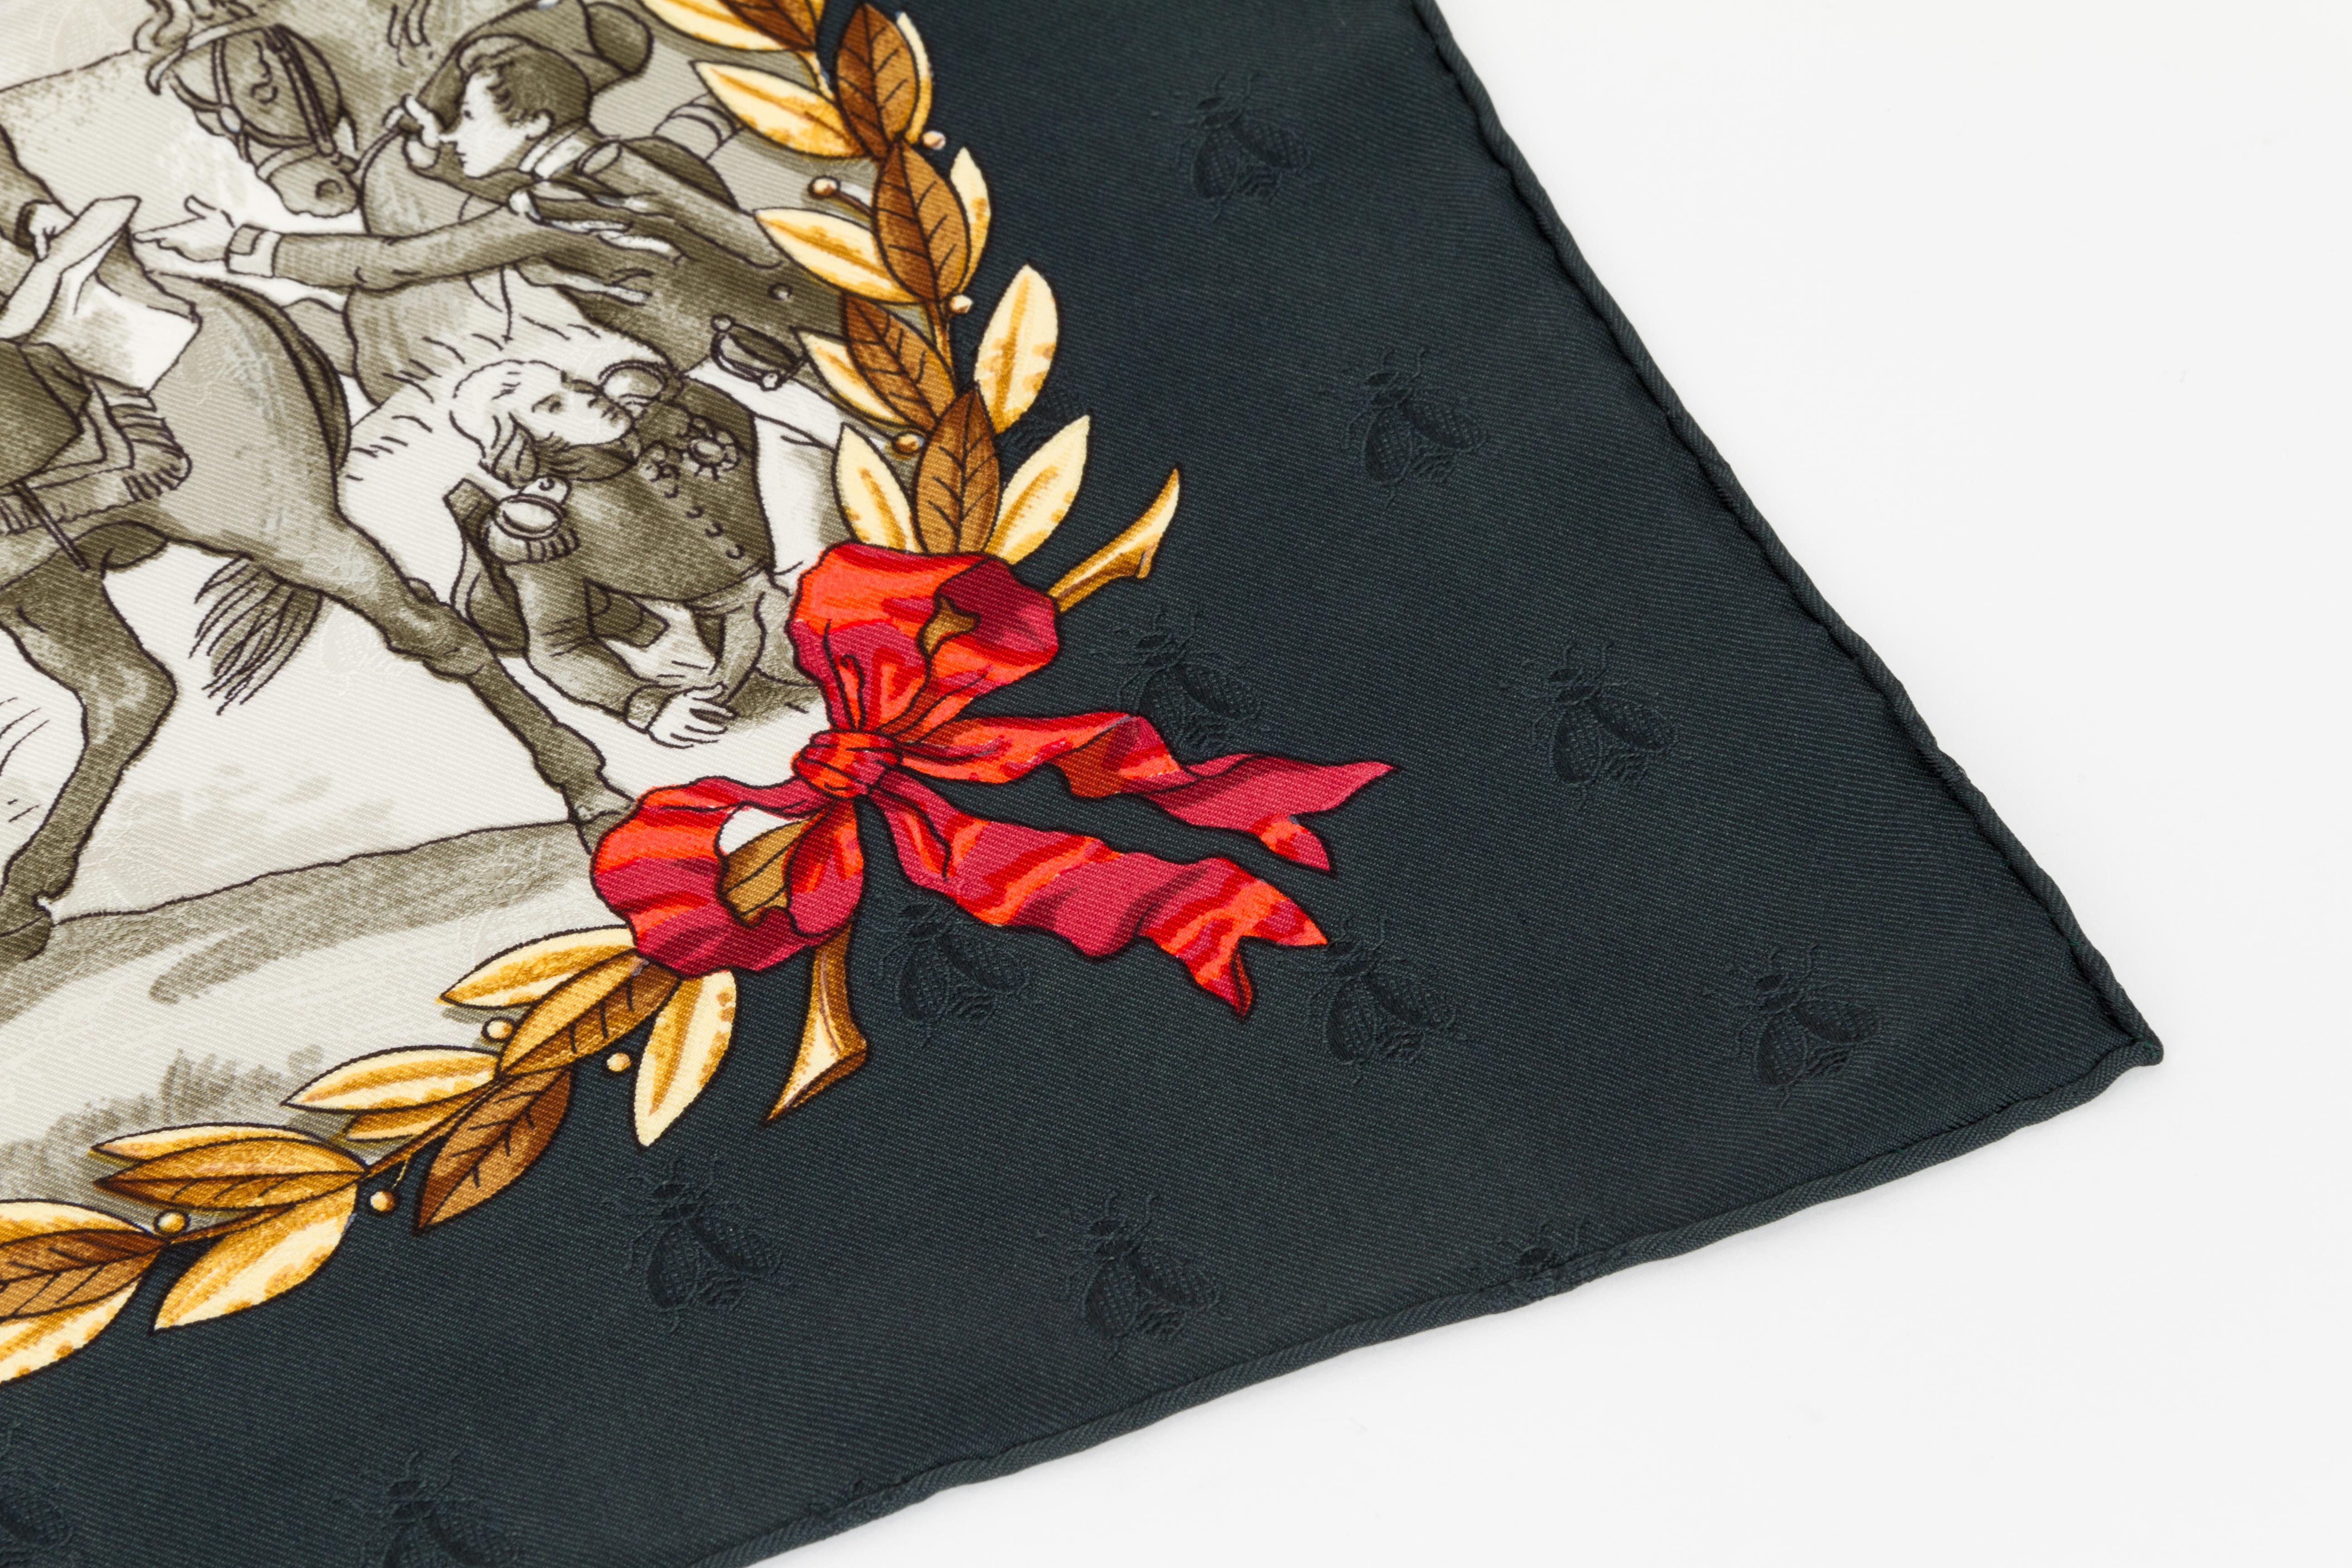 Hermès black silk twill Napoleon scarf by Philippe Ledoux, 1963. Hand-rolled edges. Does not include box.